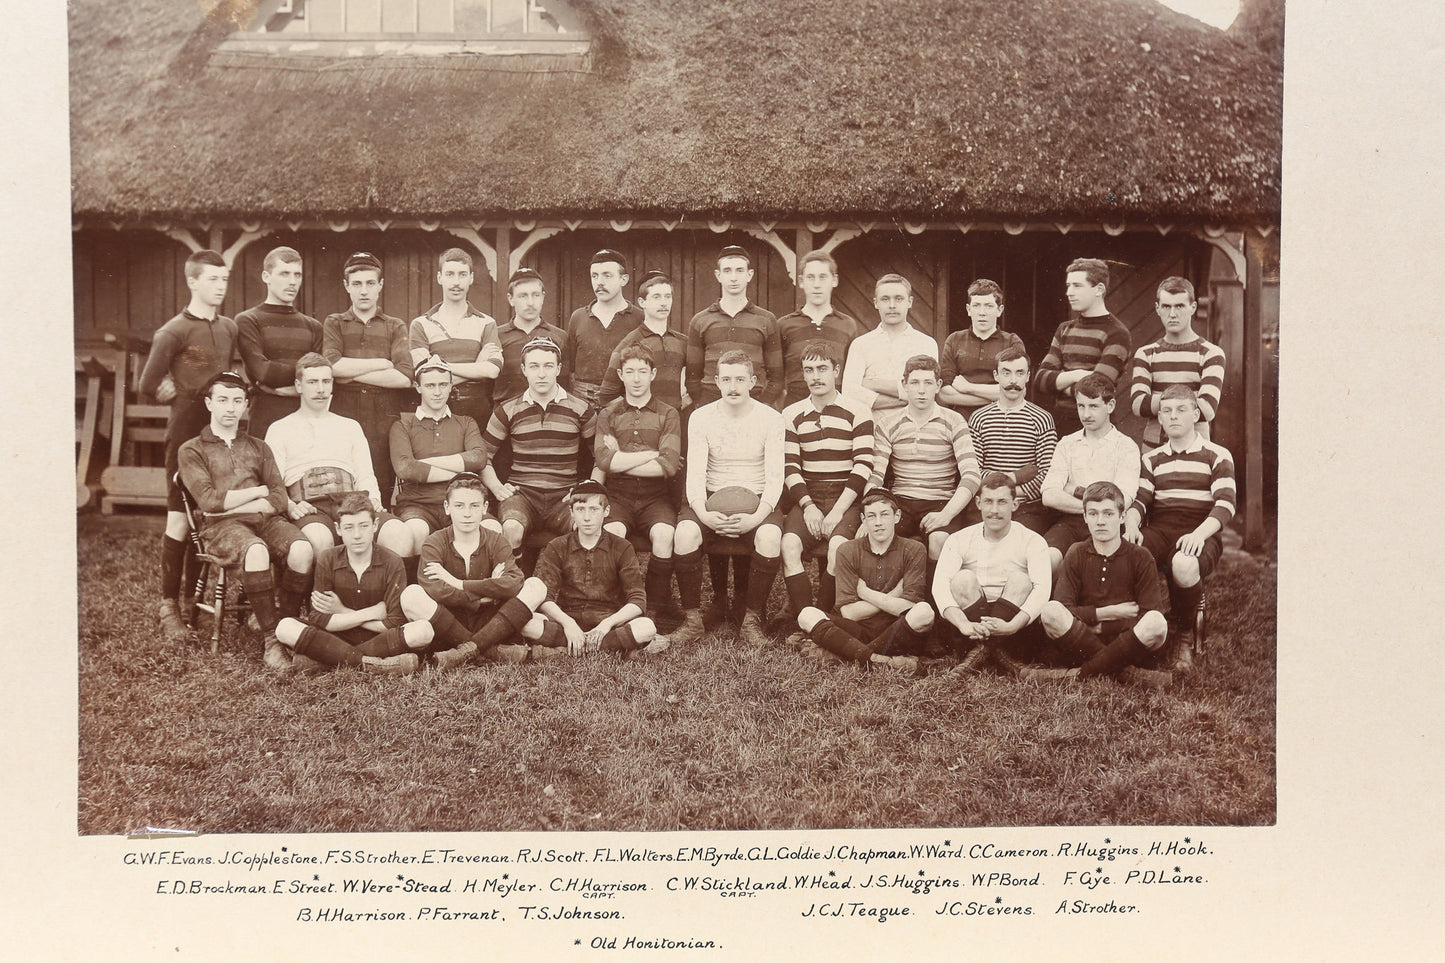 Antique Large Format Photograph Rugby Team Photo 1897-1898 Old Honitionian Thatch Roof Rugby Stripes Fully Labeled Hand Calligraphy